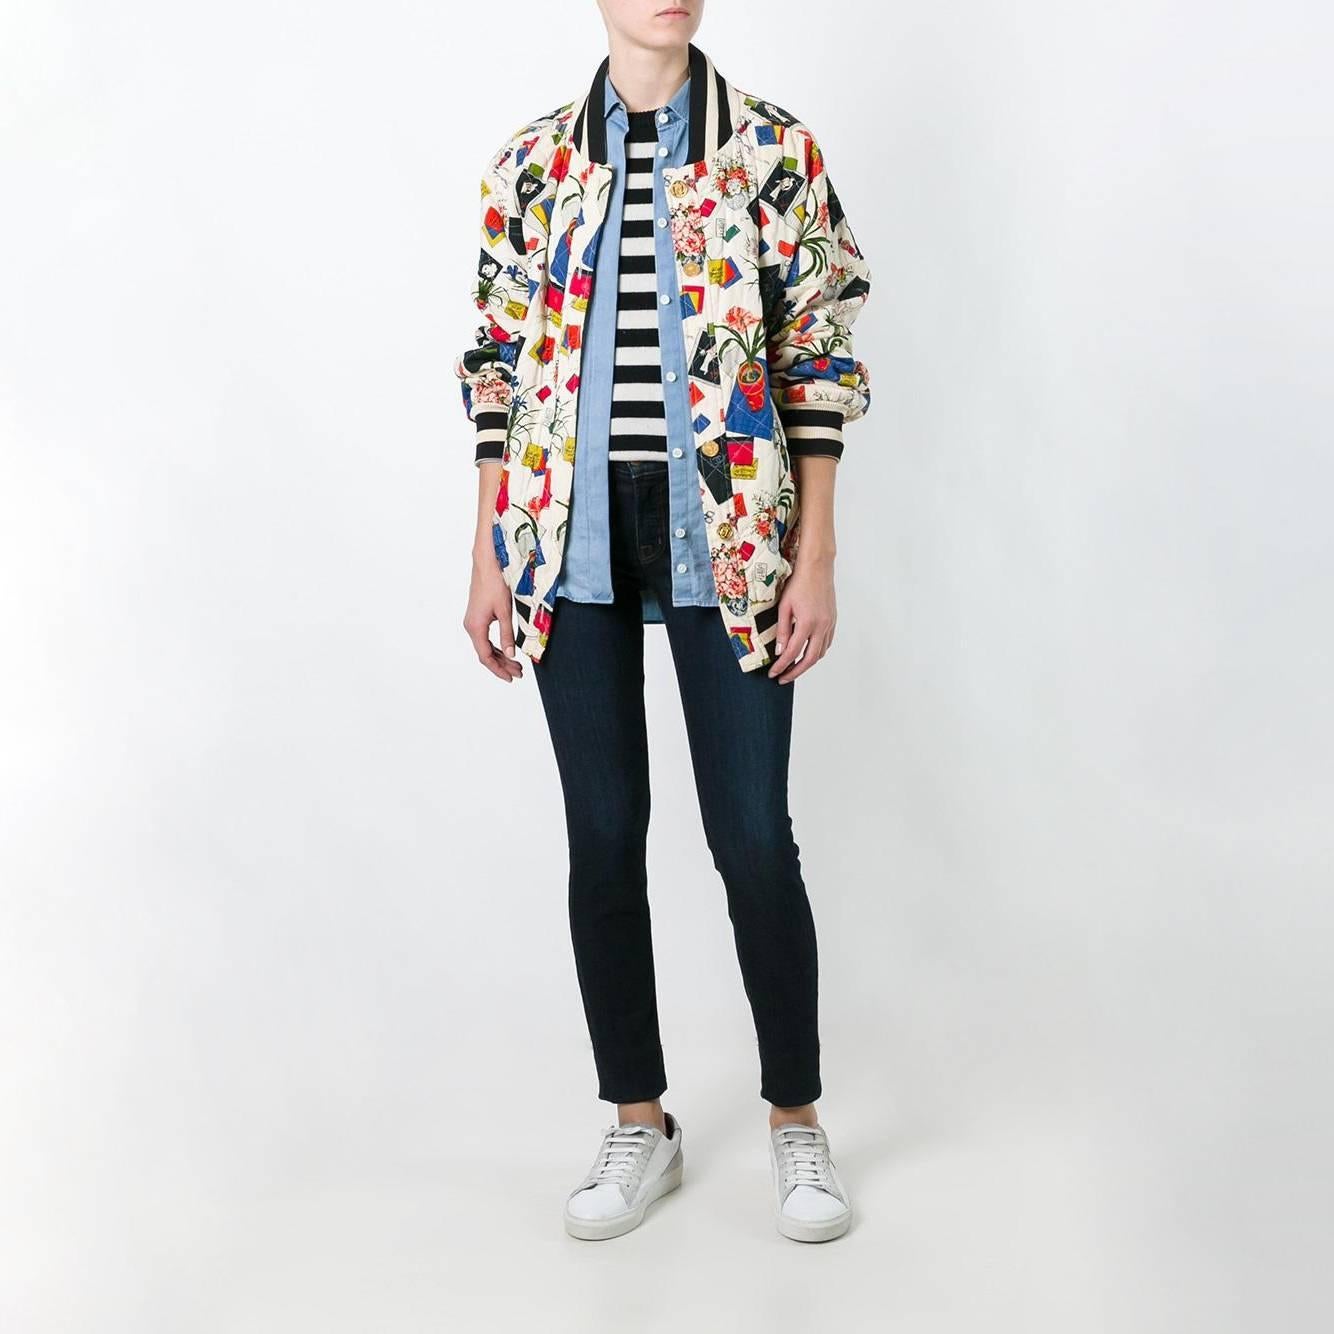 This vintage Chanel bomber jacket feels highly relevant to the 80s revival and sportswear trends happening today. Its athletic design includes varsity banding details across the collar, cuffs and waist, and a quilted cream cotton. It is patterned